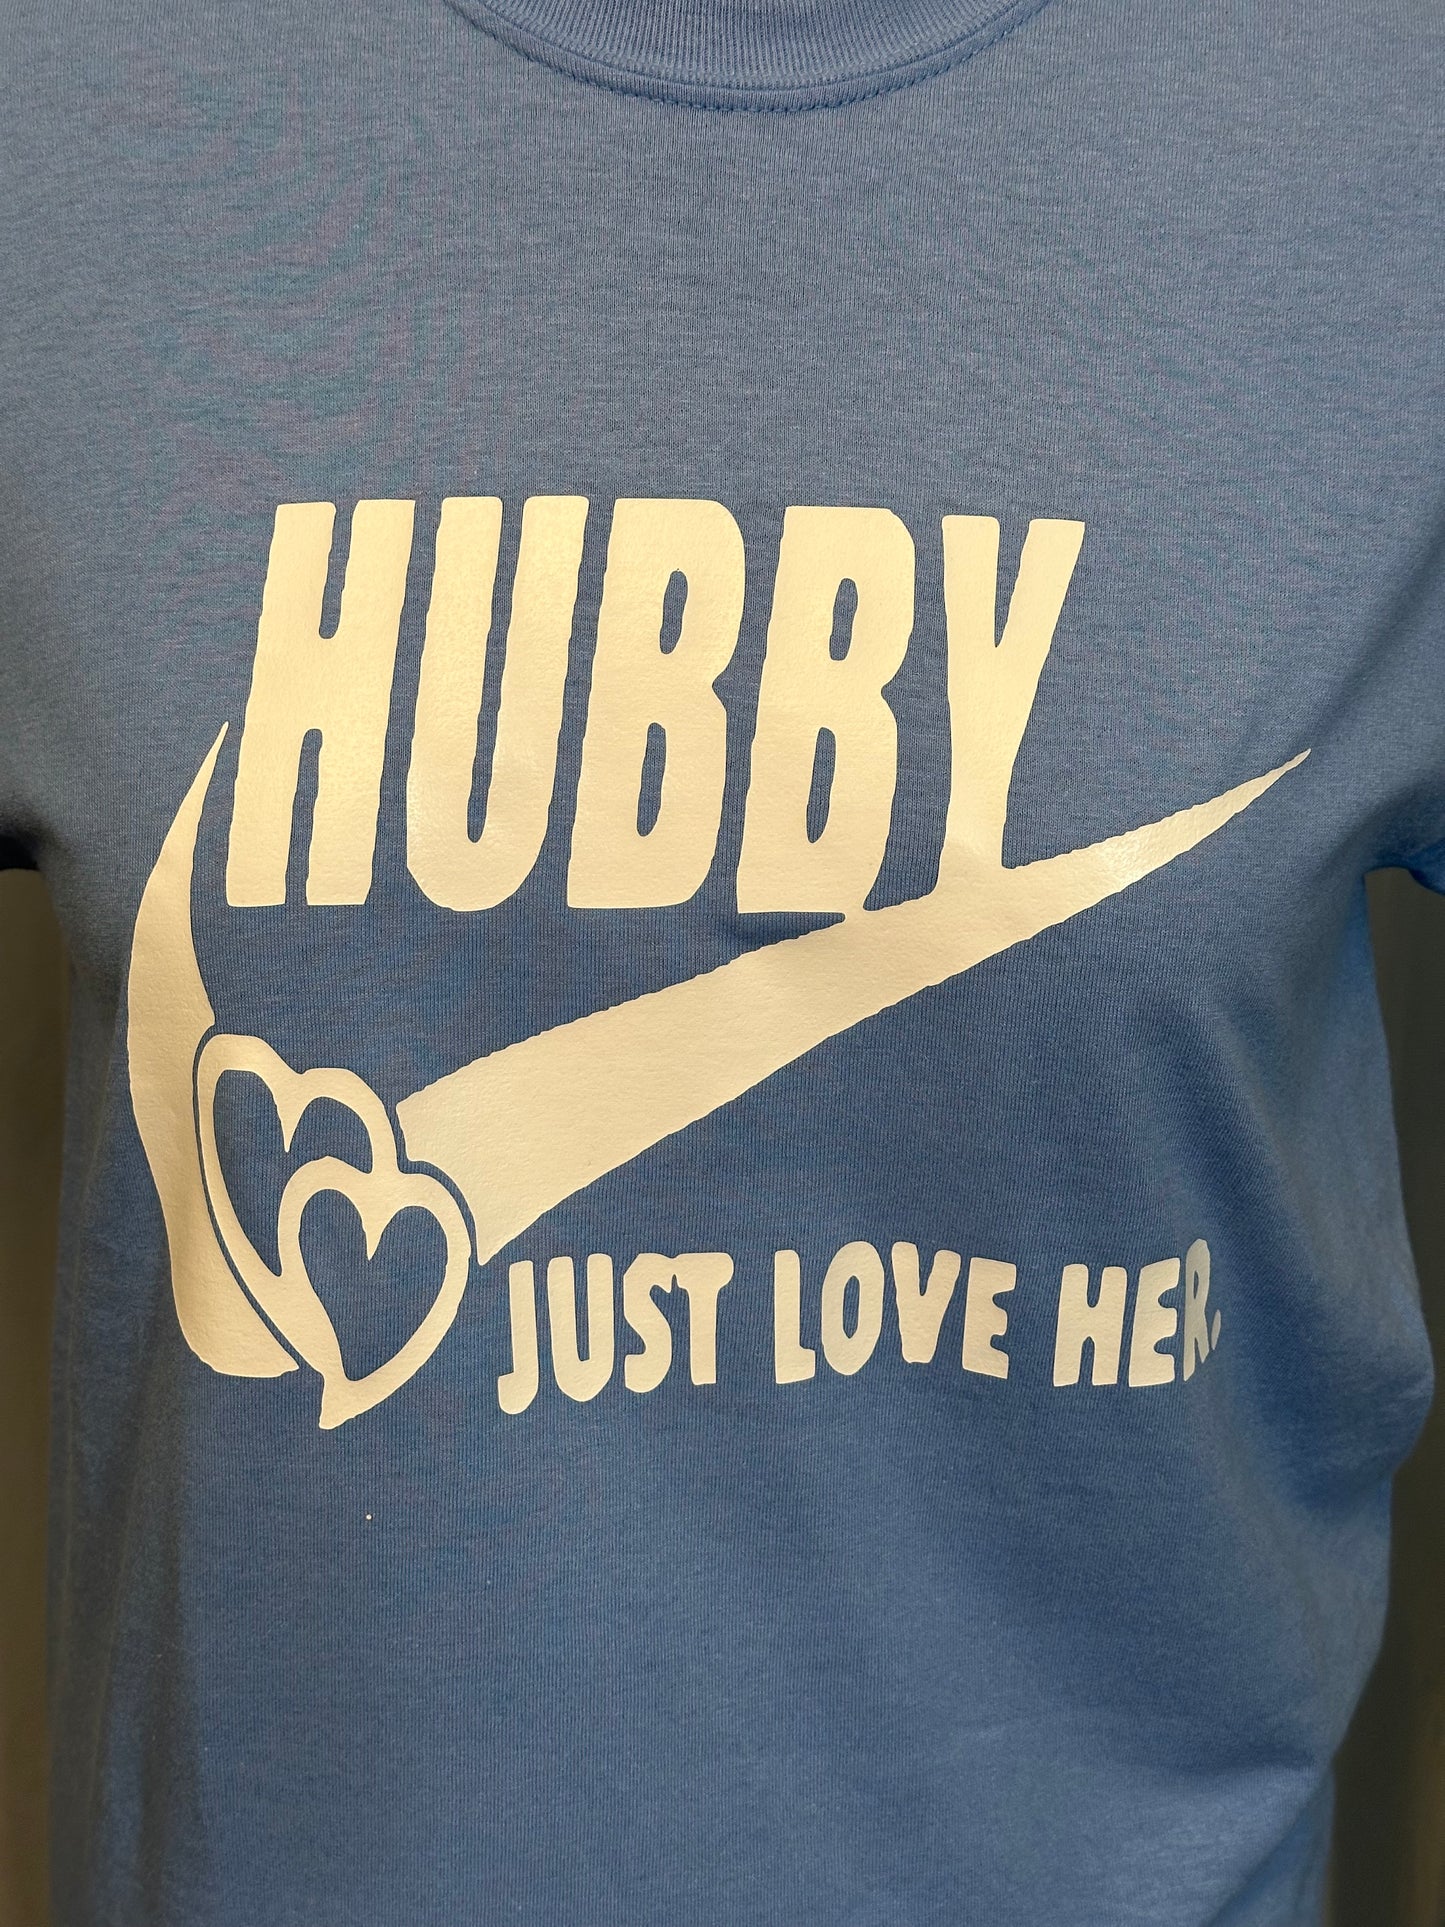 Hubby: Just Love Her